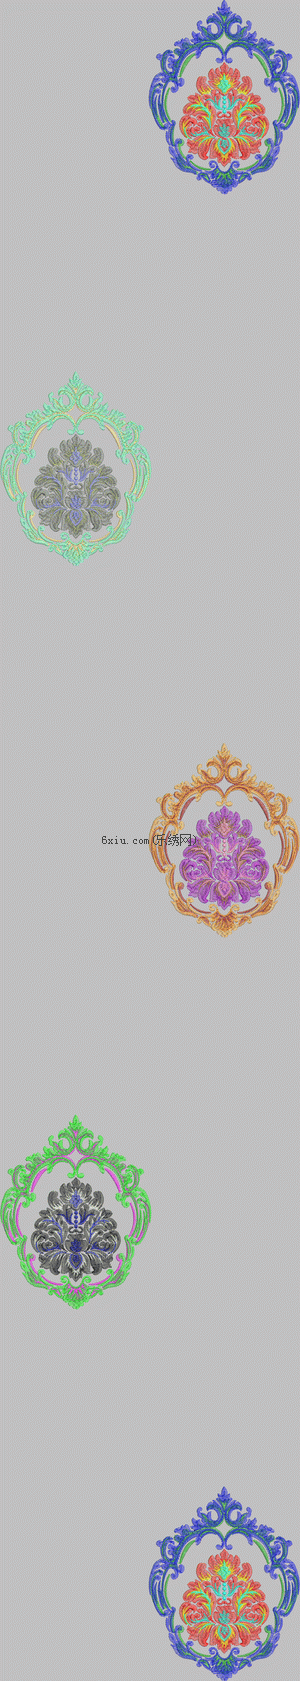 curtain embroidery pattern album